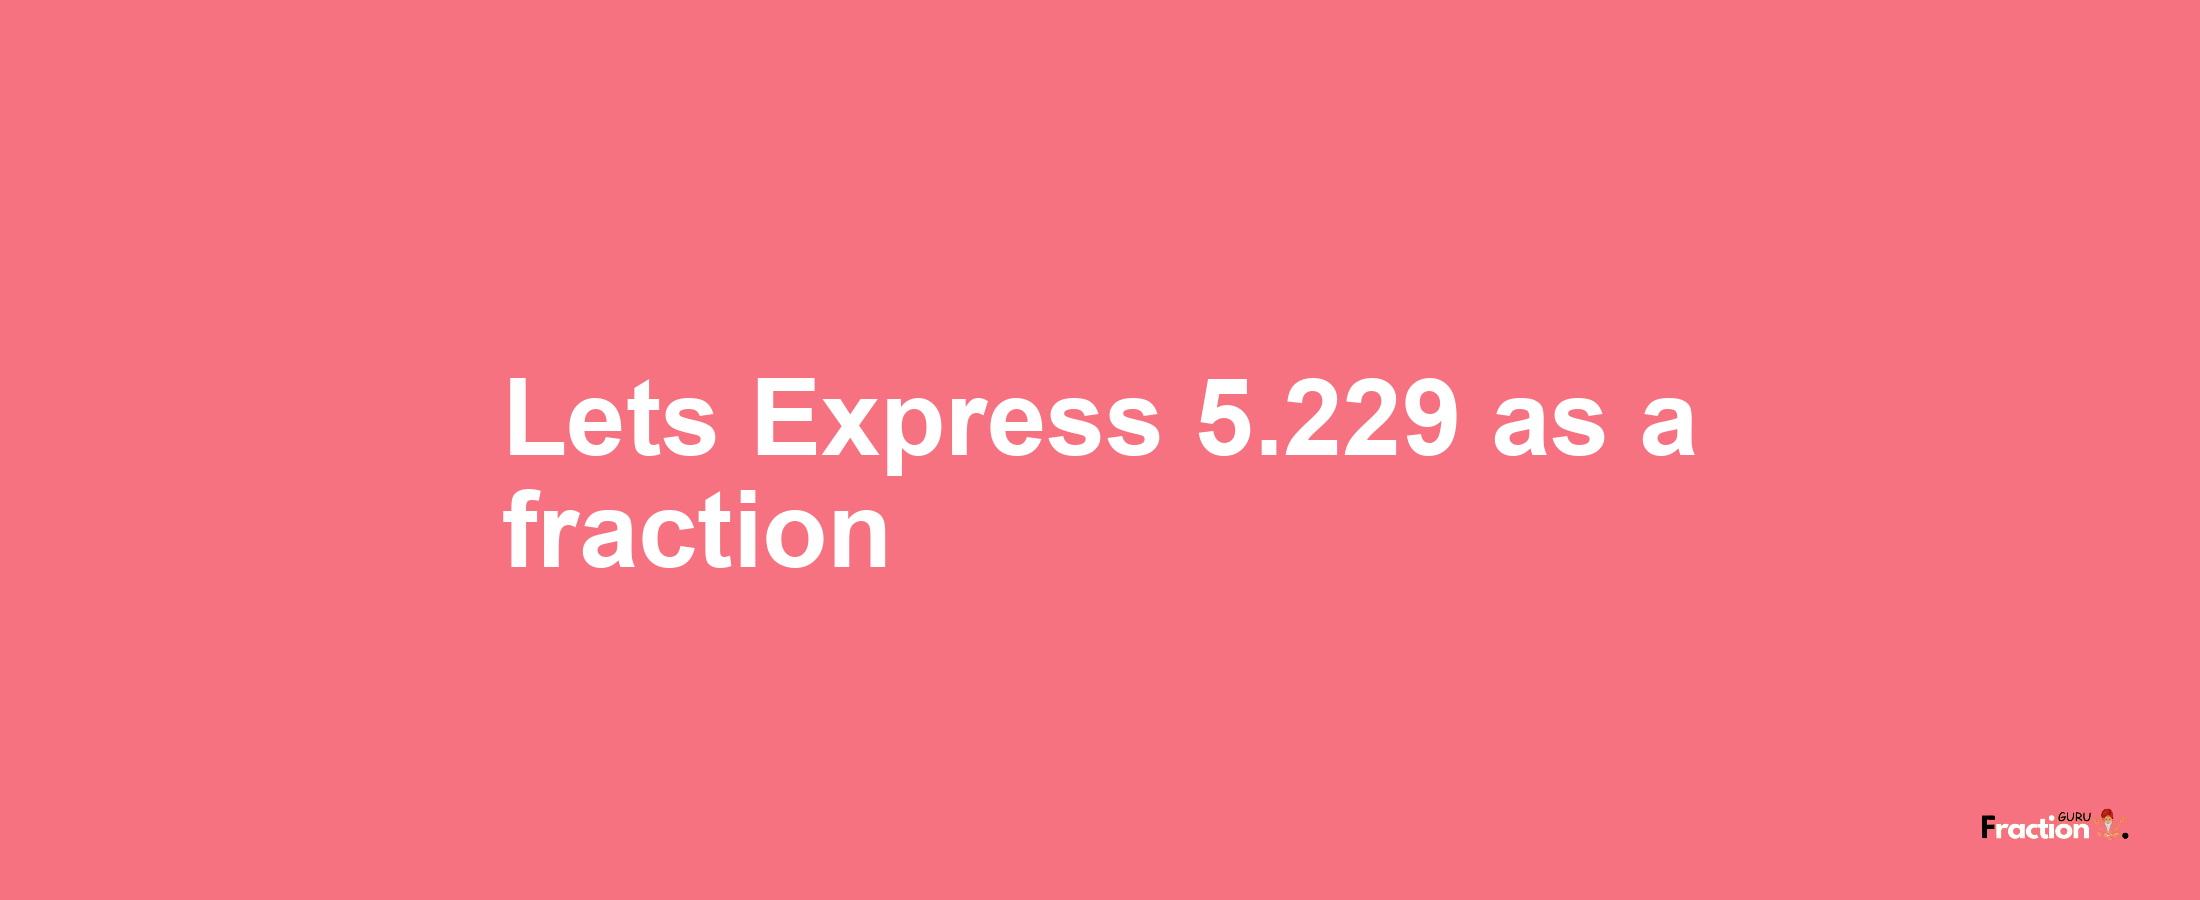 Lets Express 5.229 as afraction